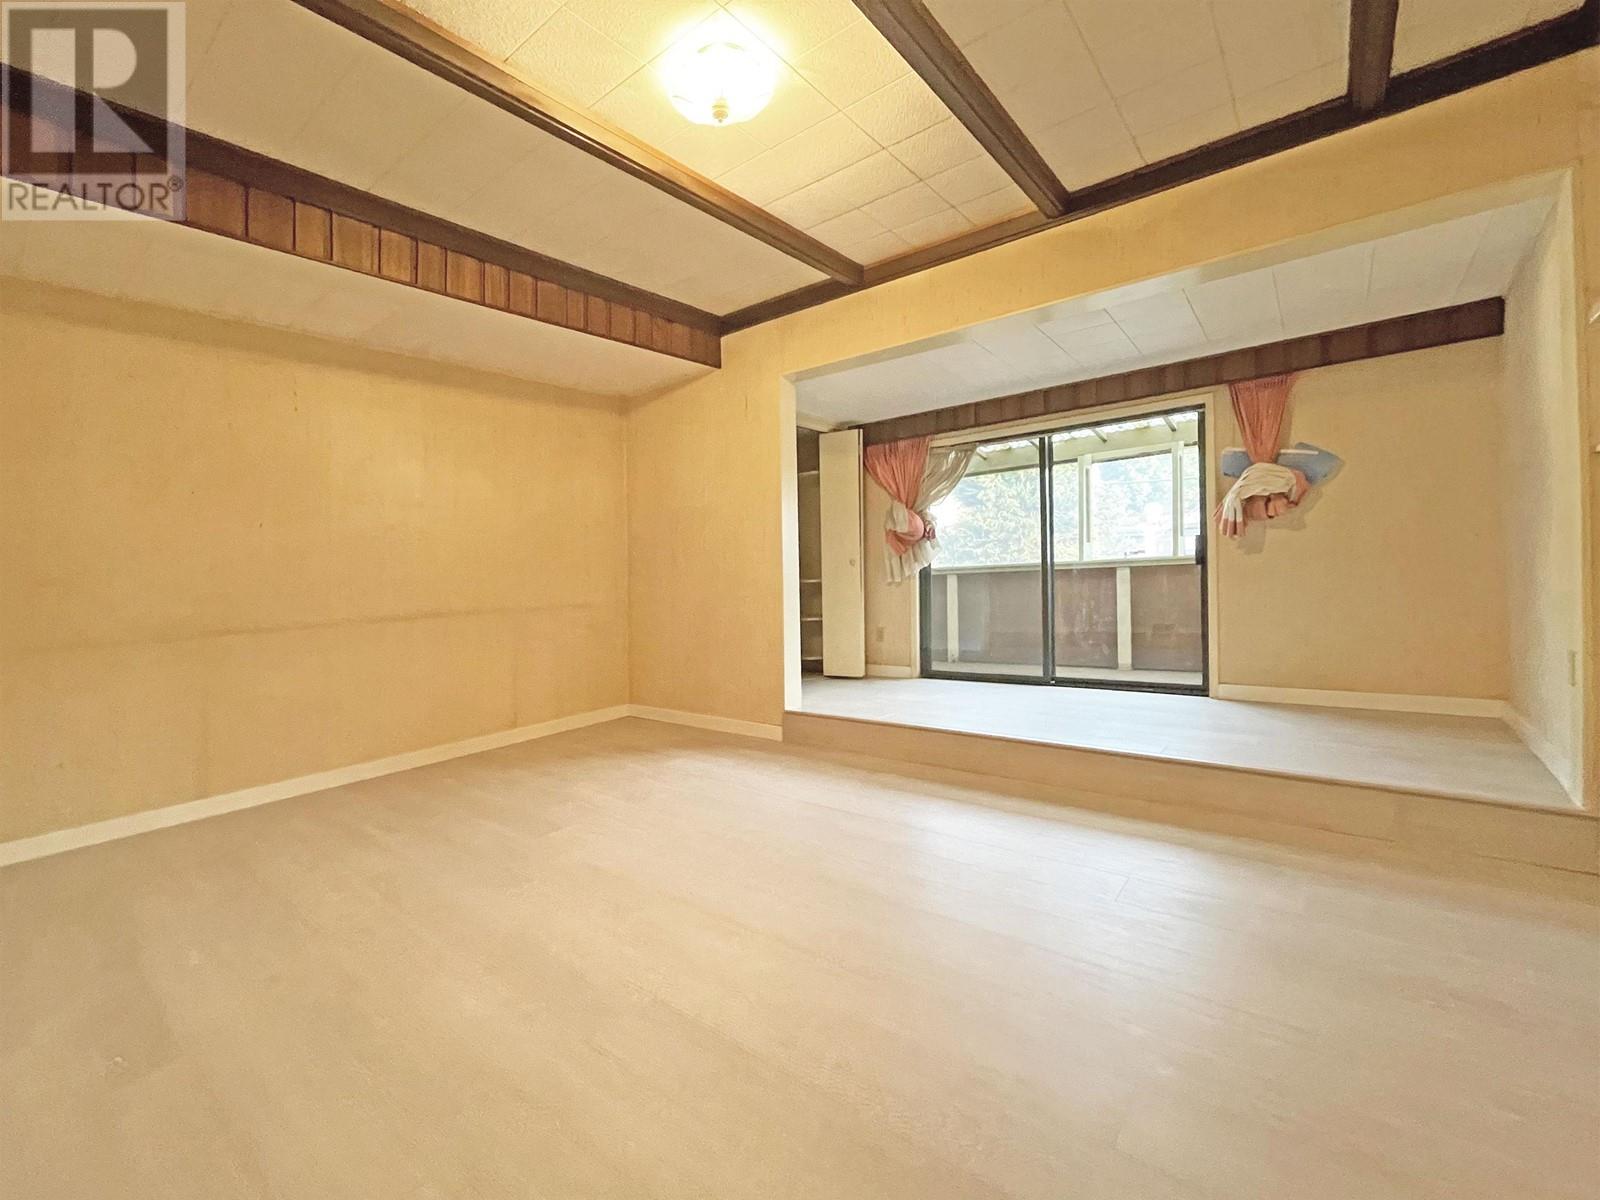 Listing Picture 22 of 30 : 2908 W 8TH AVENUE, Vancouver / 溫哥華 - 魯藝地產 Yvonne Lu Group - MLS Medallion Club Member